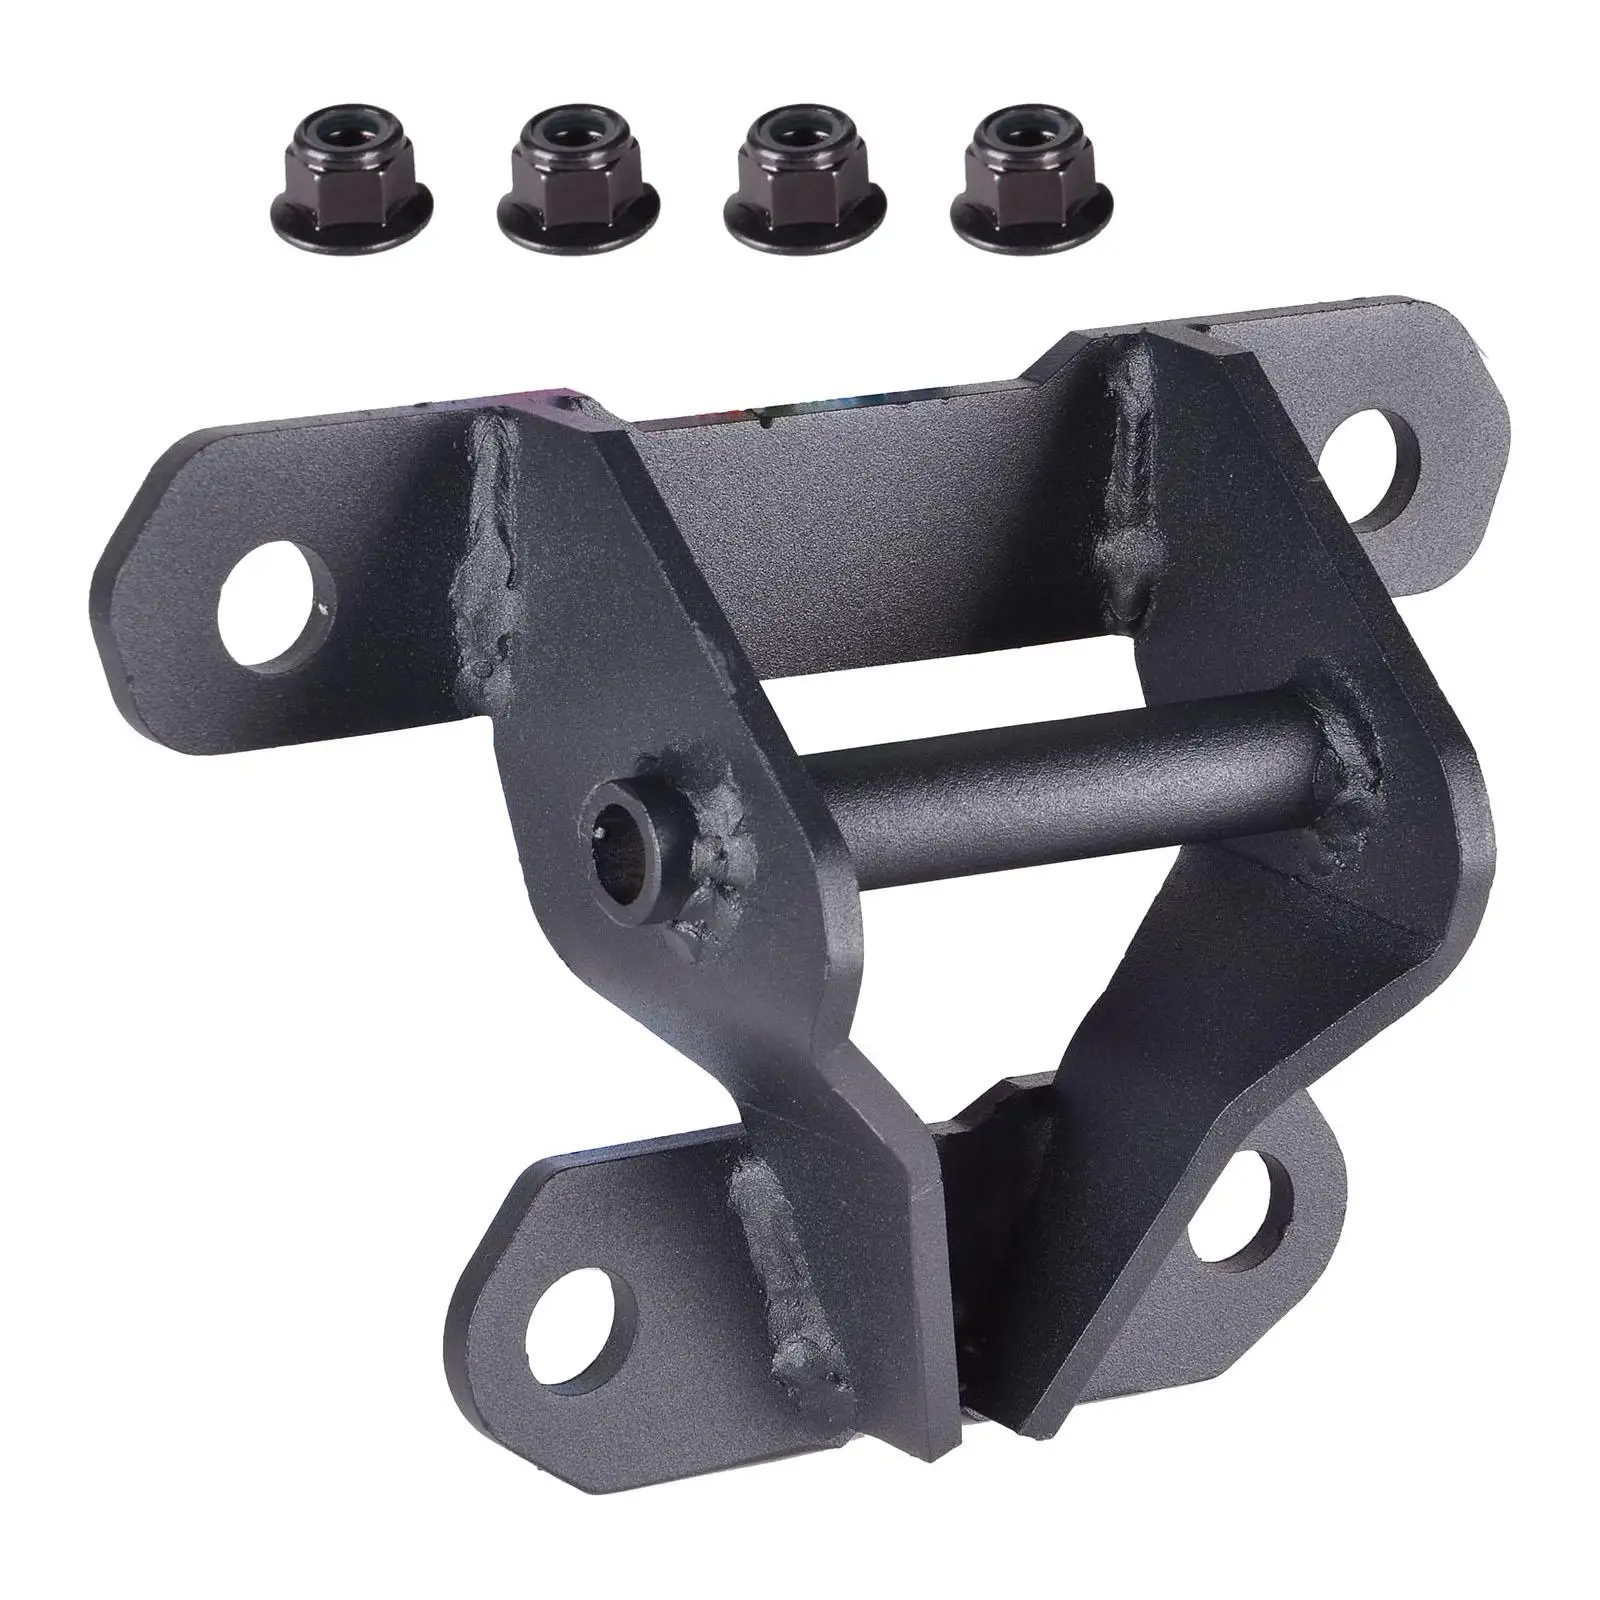 Exterior UTV Rear Pull Plate Tow Hook High Strength Moulding Iron Replacement for Canam x3 / x3 Max 18-2021 715004450 Parts